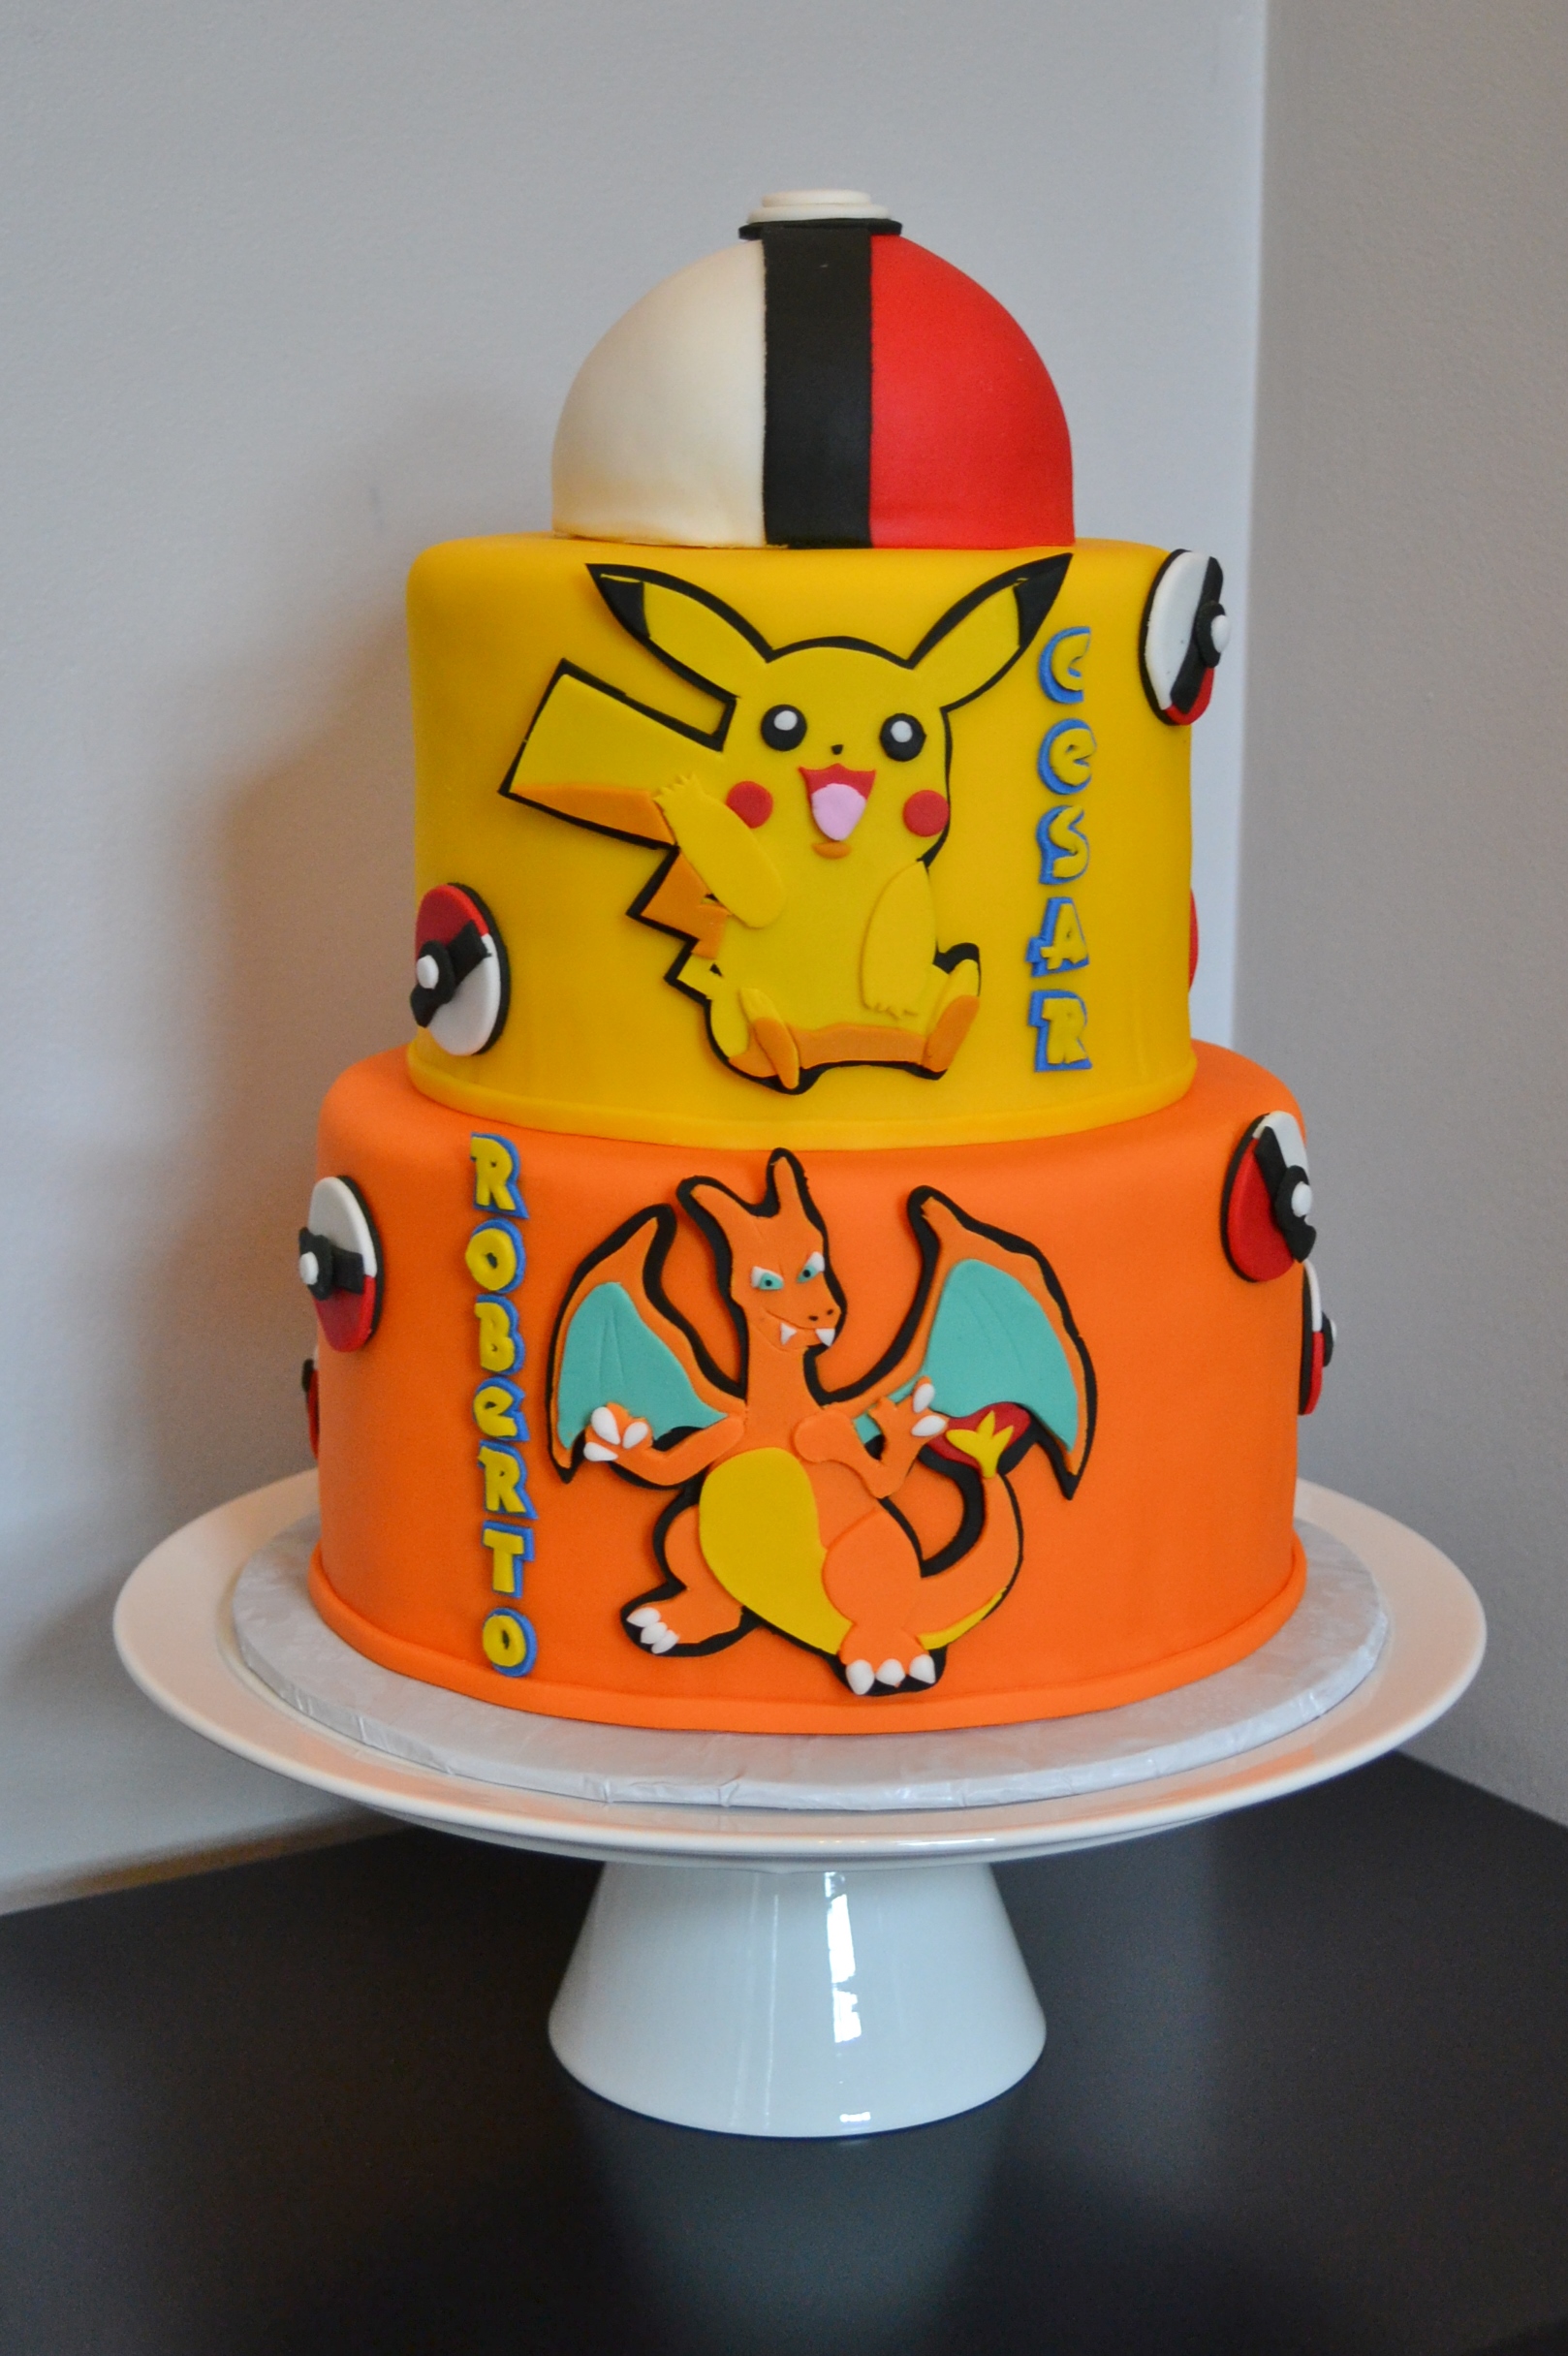 Pokemon Characters Cakes | Express Delivery Available | Gurgaon Bakers